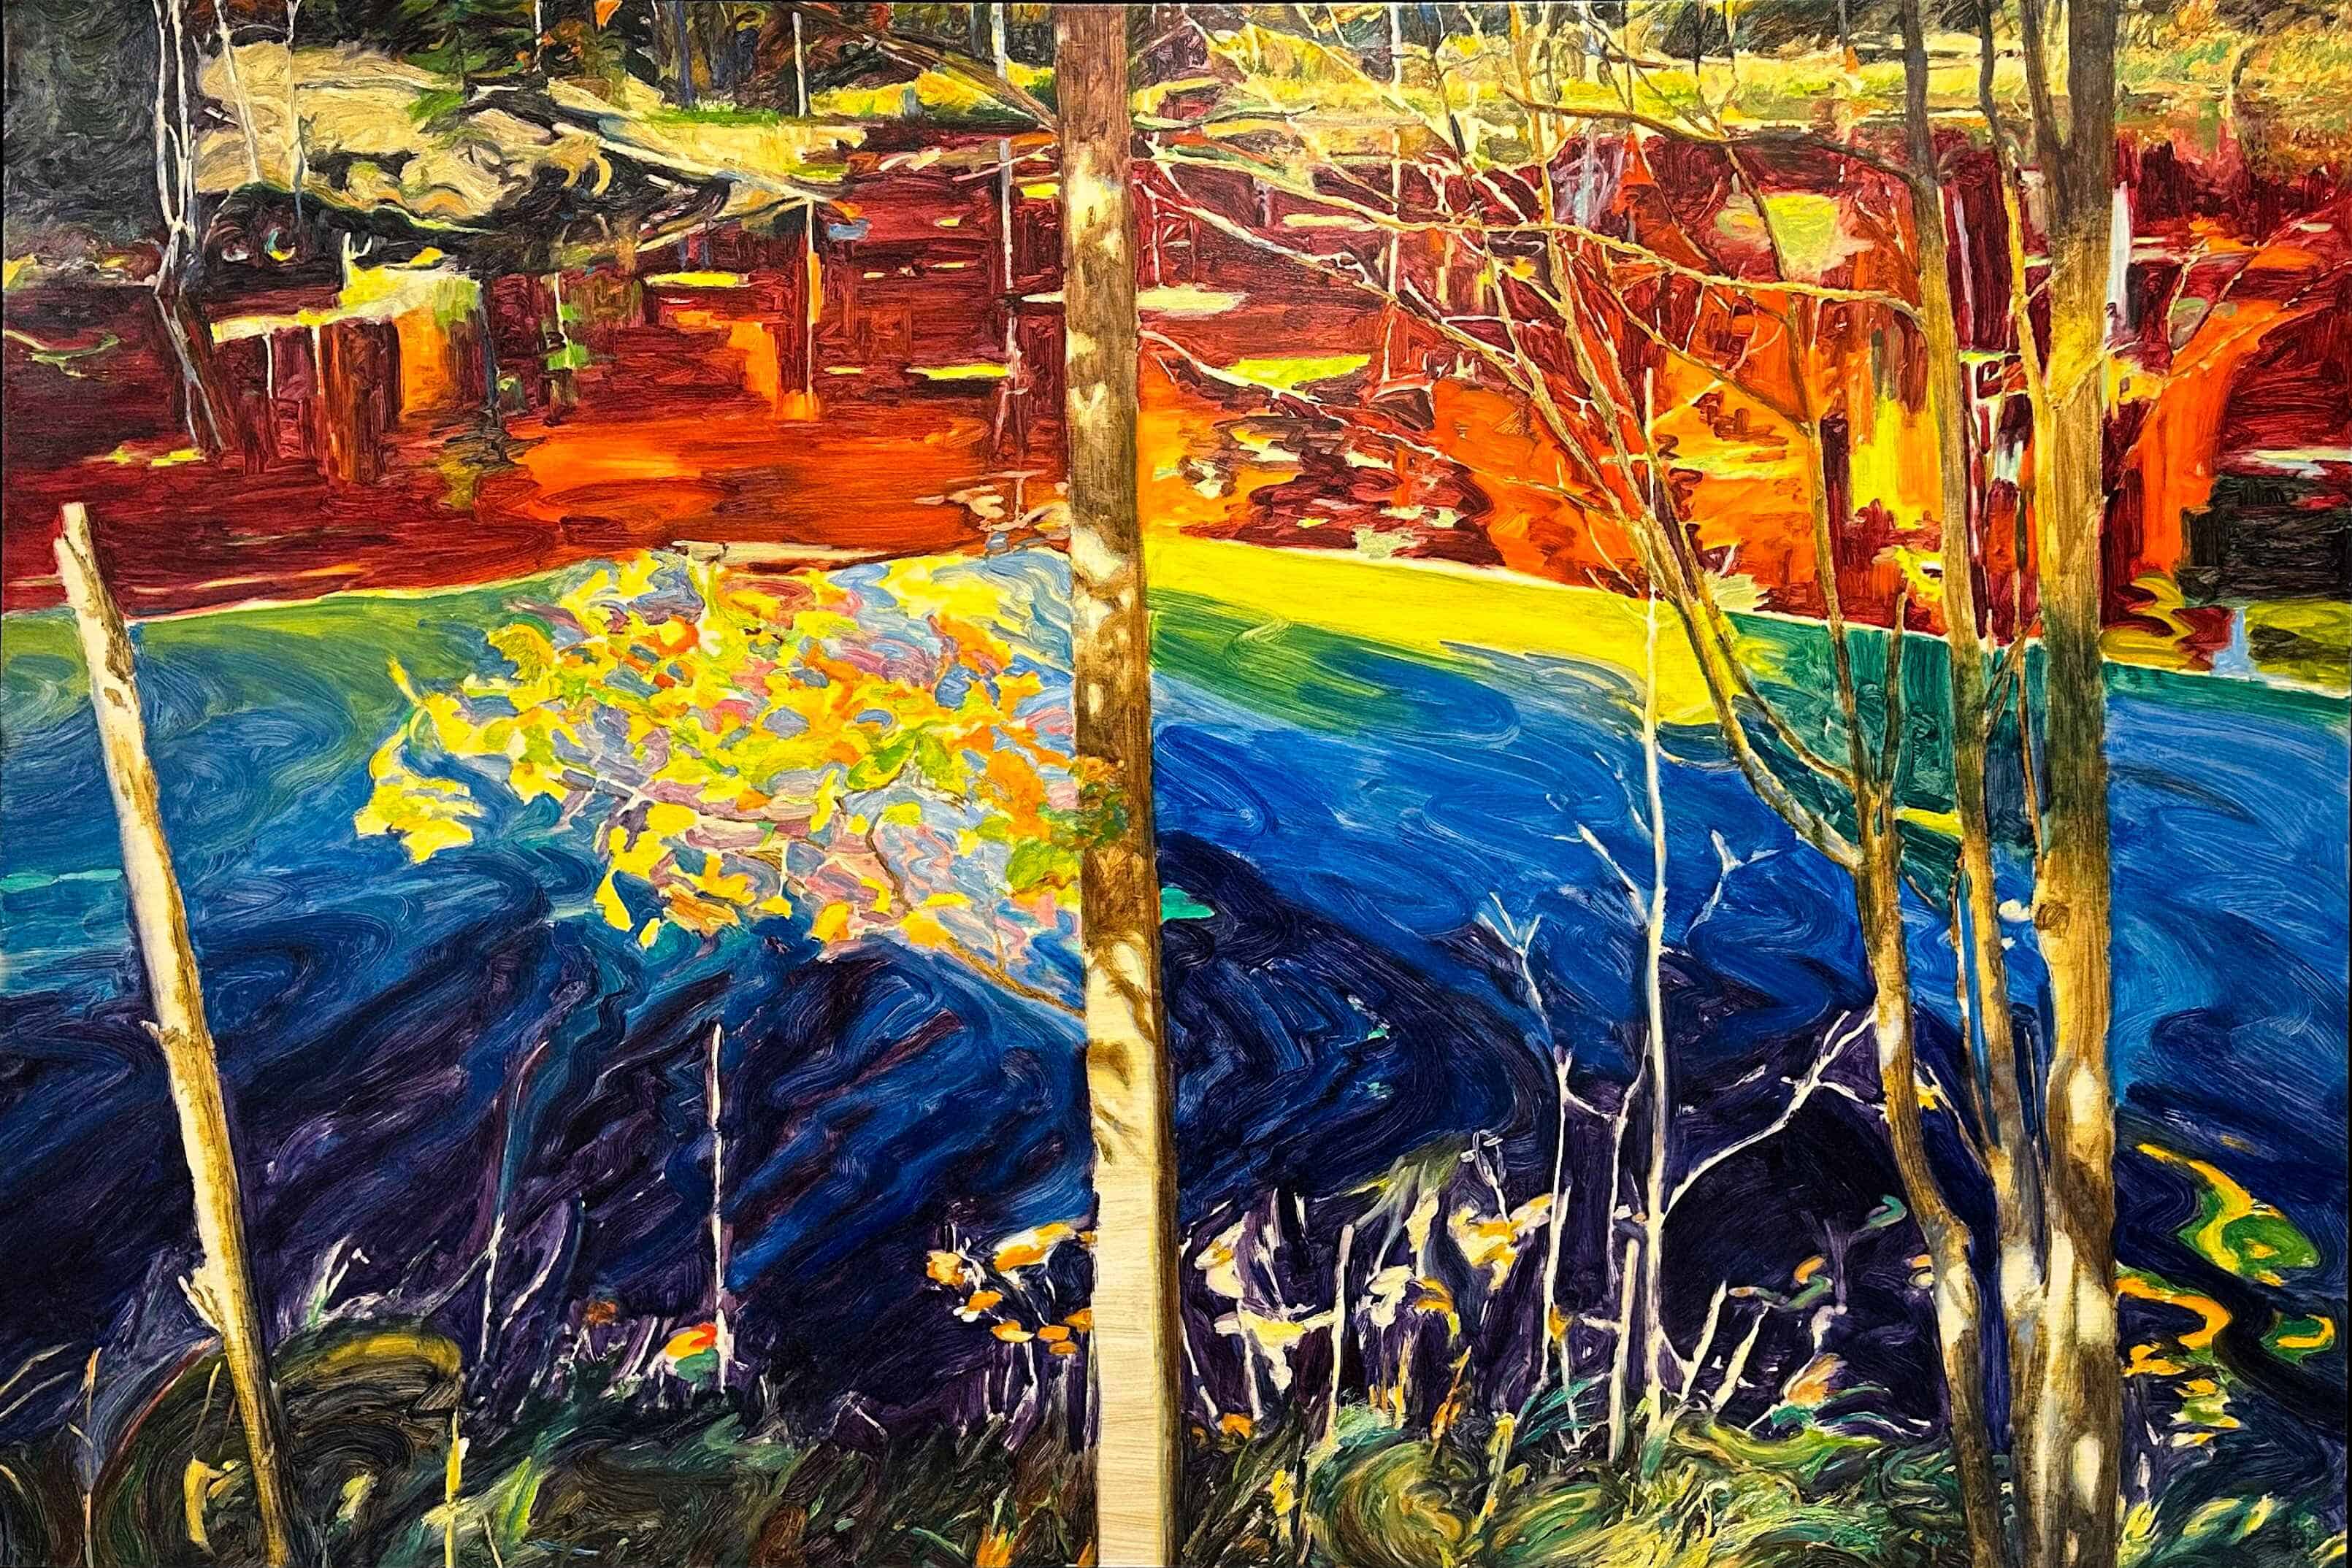 Contemporary art. Title: A Fall of Yellow on Blue, Oil on Canvas, 53 x 79 in by Canadian artist Paul Chizik.